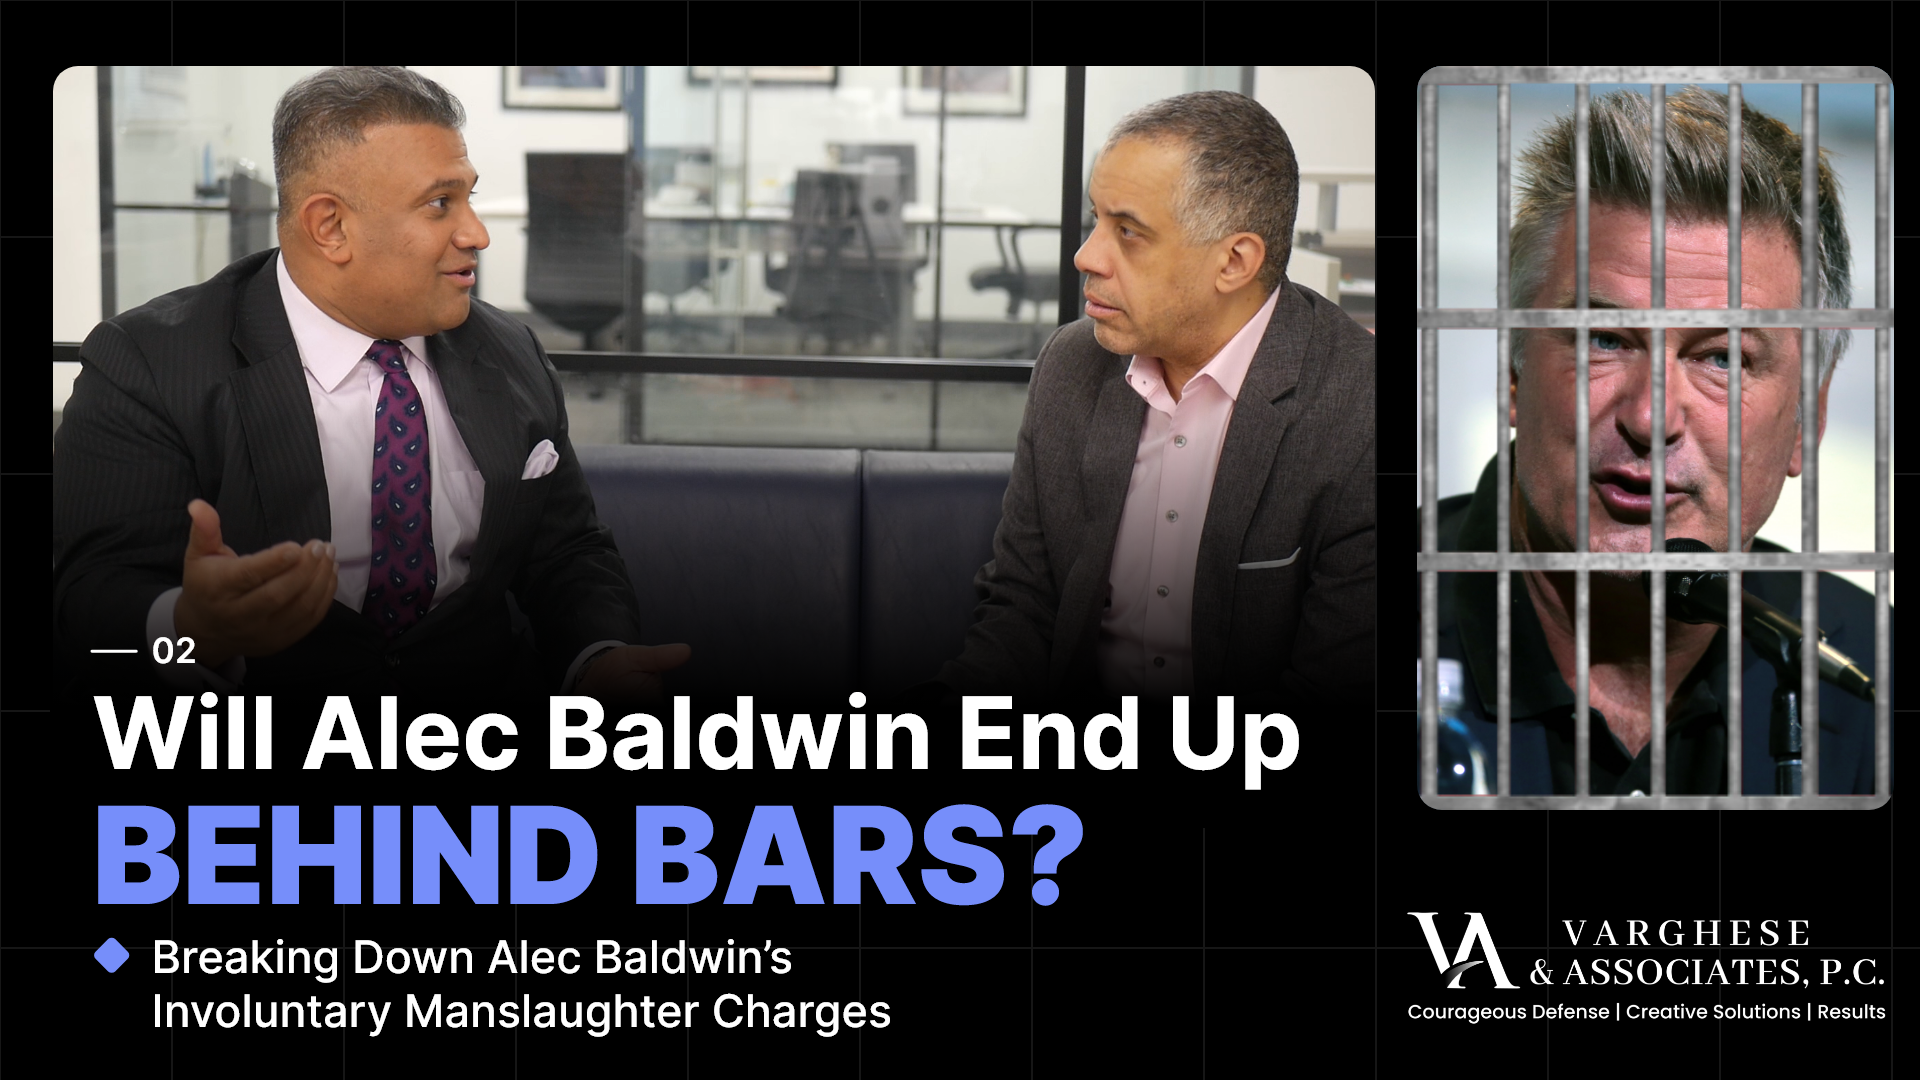 Vinoo Varghese & Larry Sharpe Discuss Alec Baldwin's Involuntary Manslaughter Charges